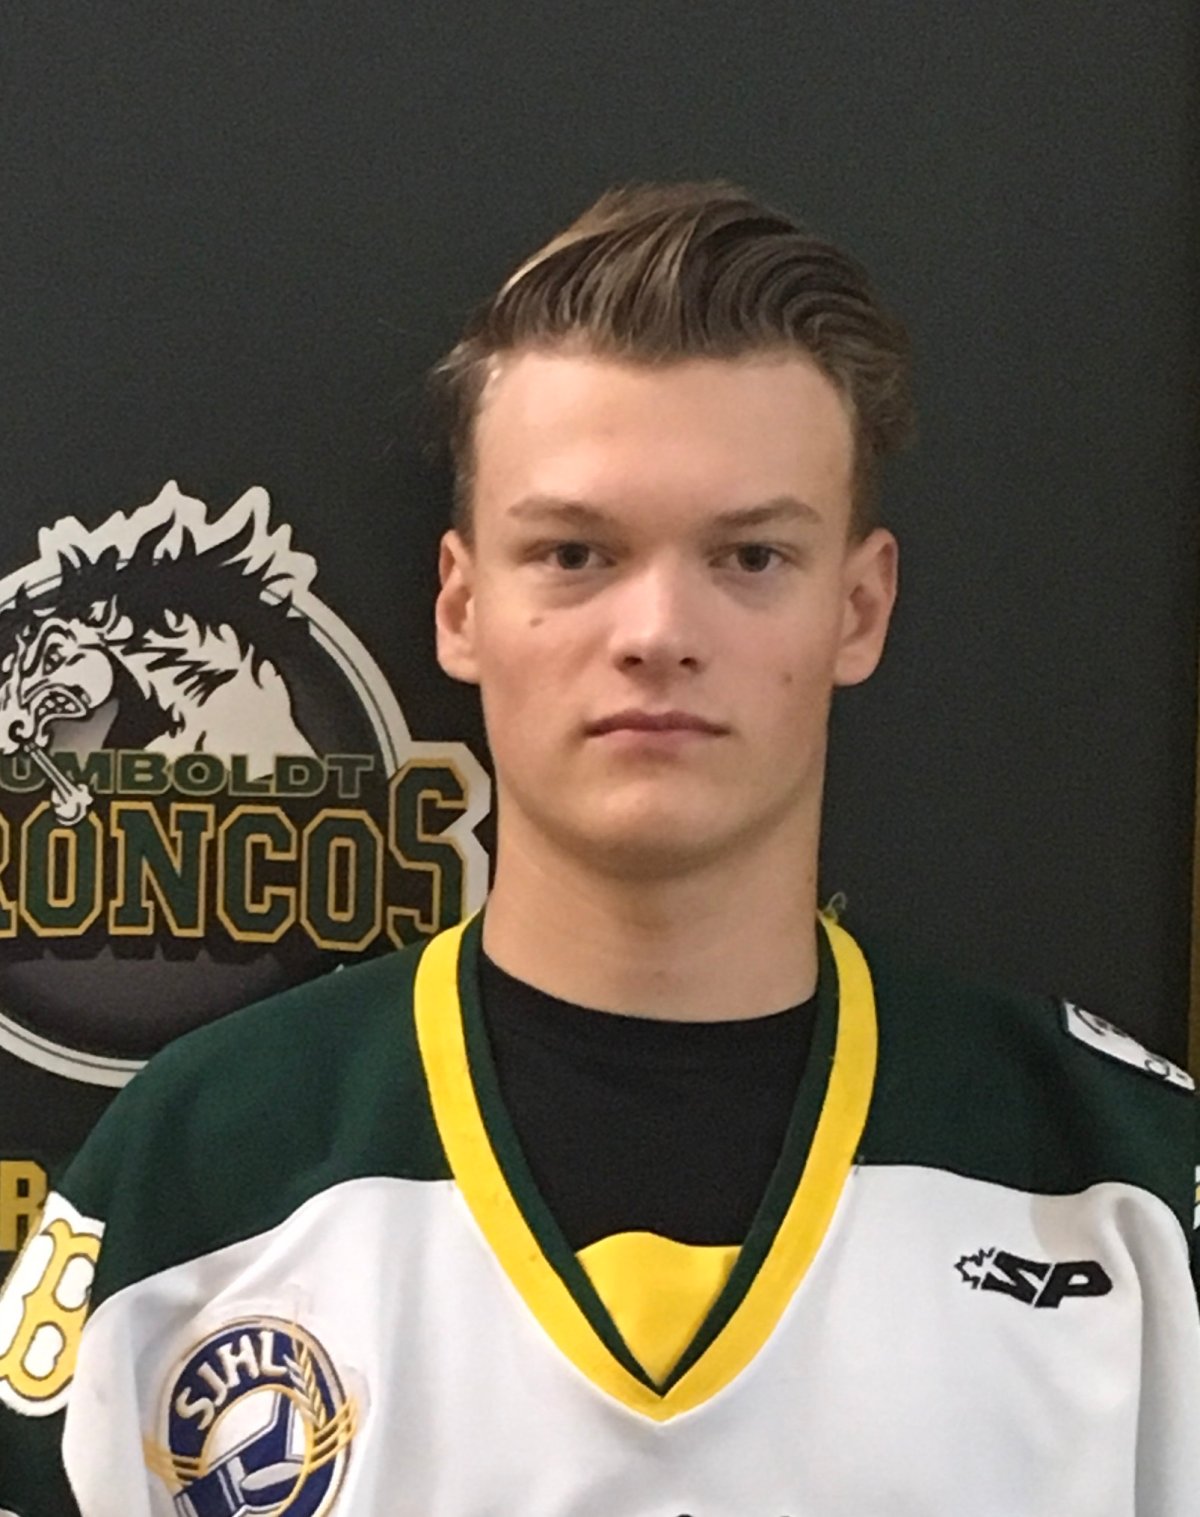 Here are the victims of the Humboldt Broncos bus crash